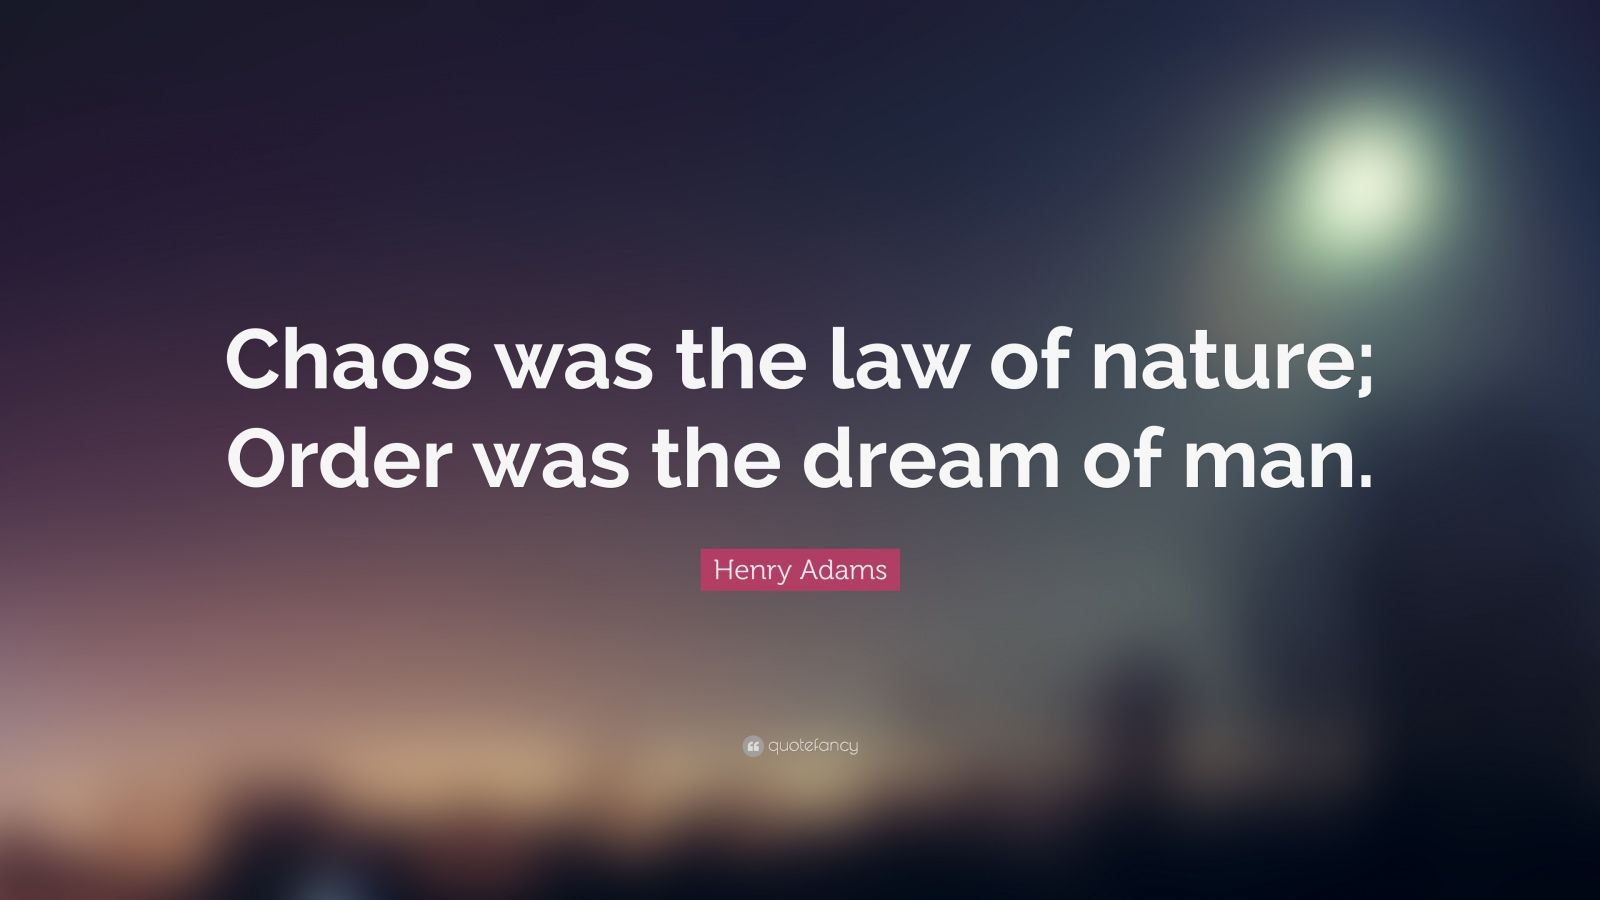 Henry Adams Quote: “Chaos was the law of nature; Order was the dream of